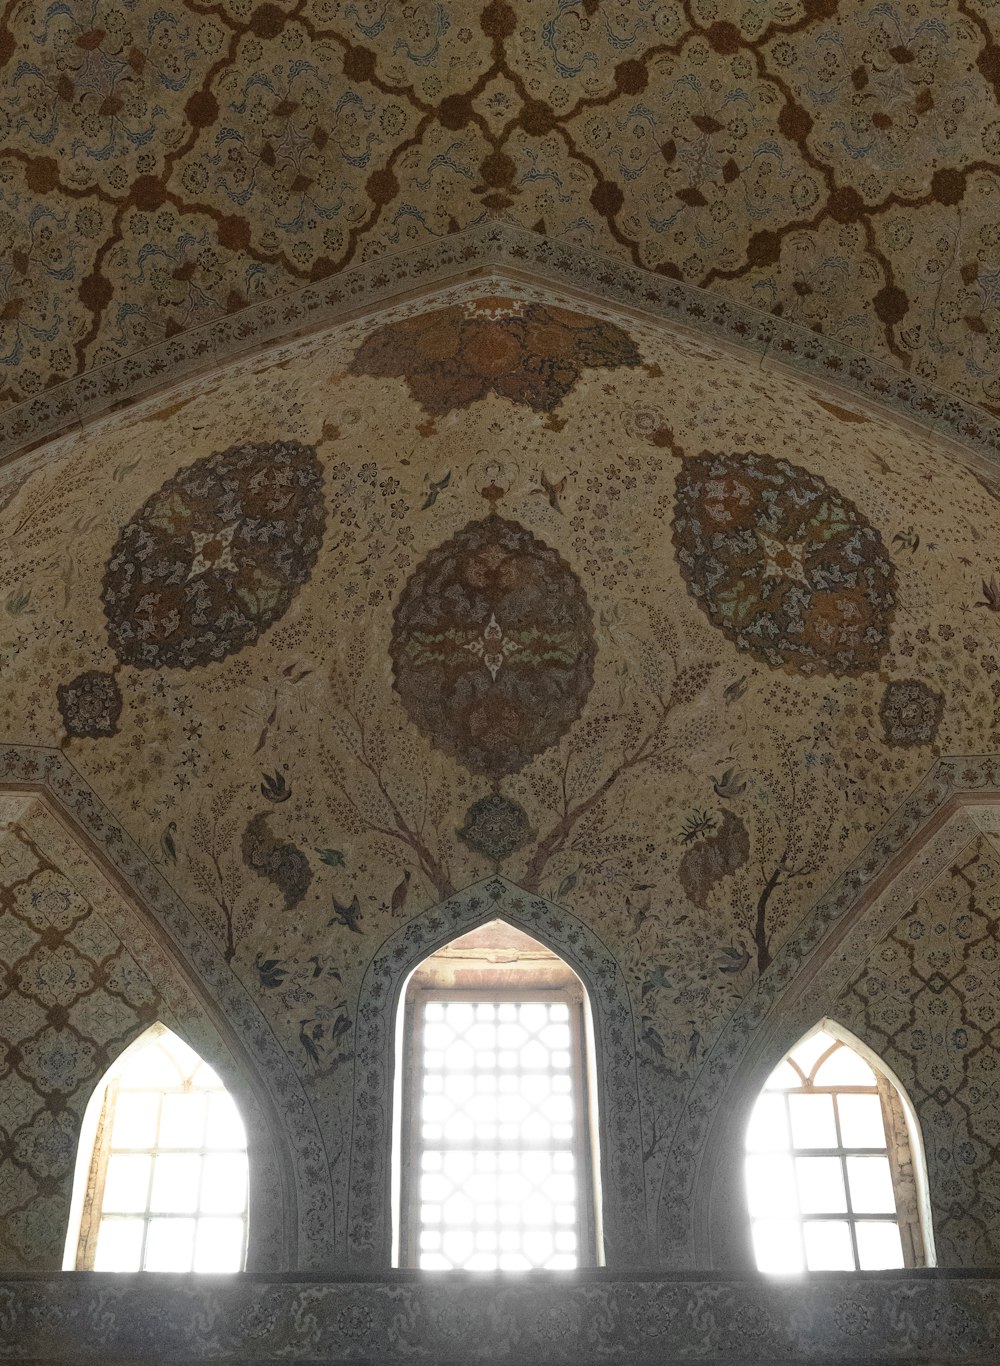 a ceiling with windows and a ceiling with arched windows